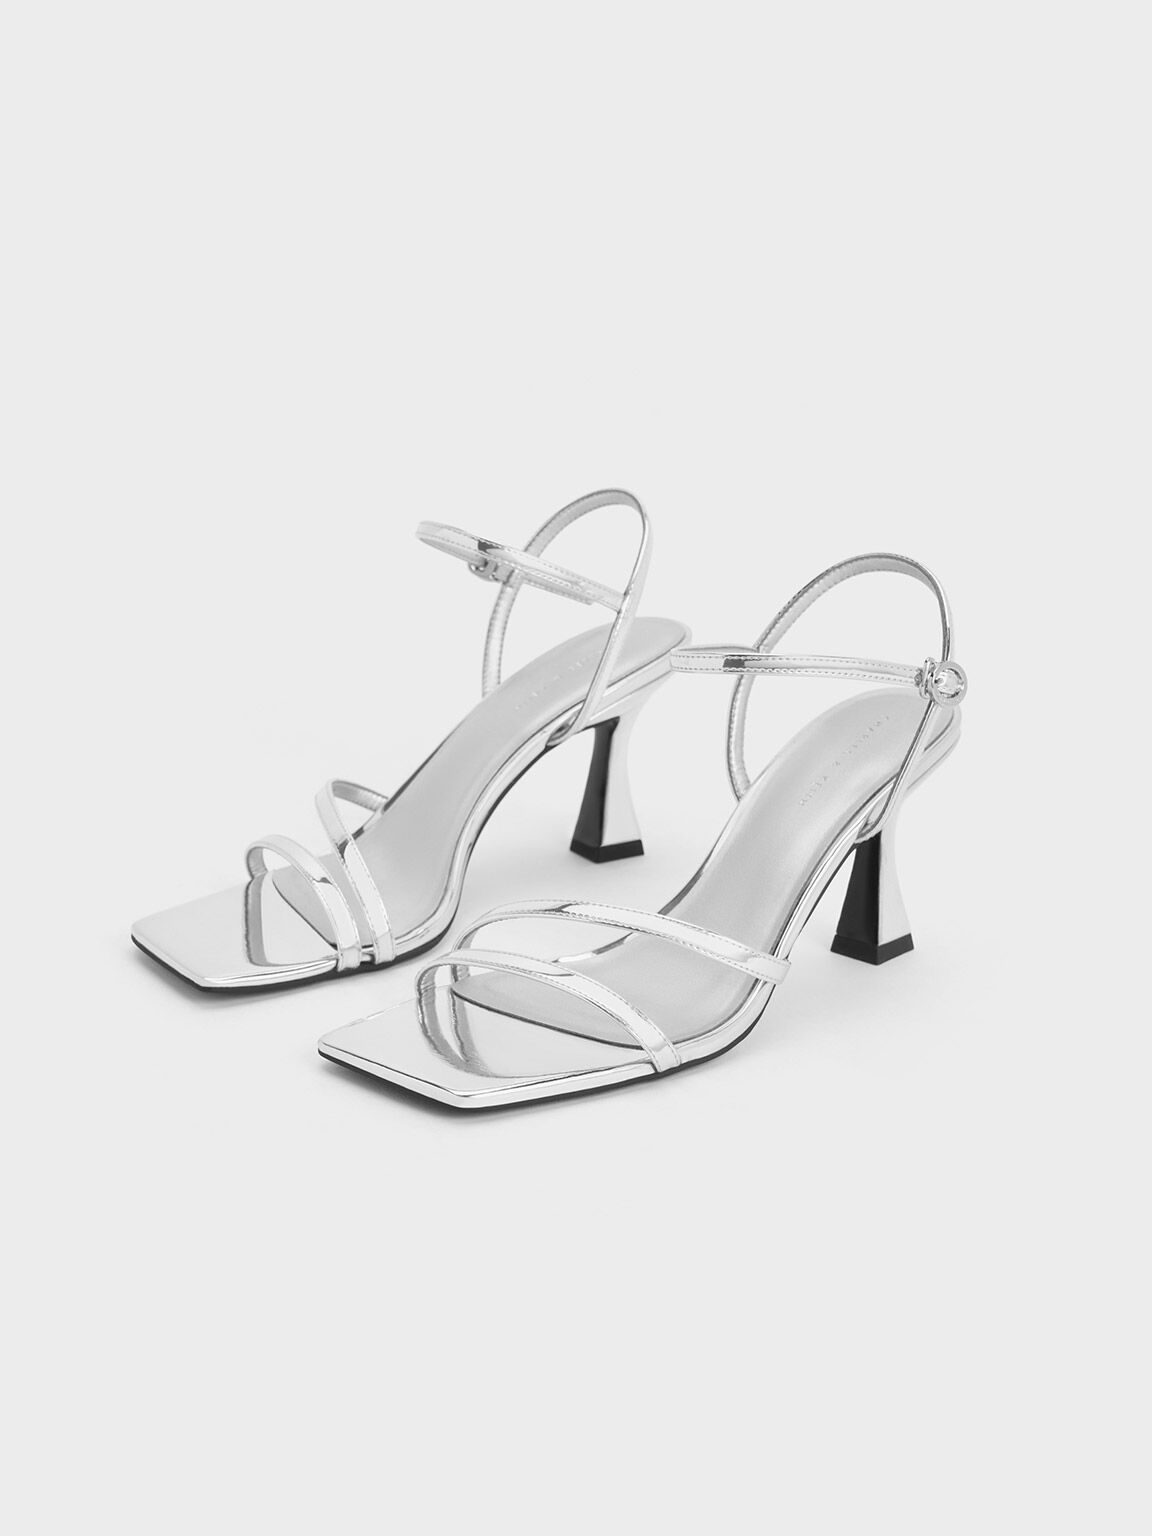 Silver Low Heel Sandals - Ankle Strap Sandals - Strappy Sandals - Lulus